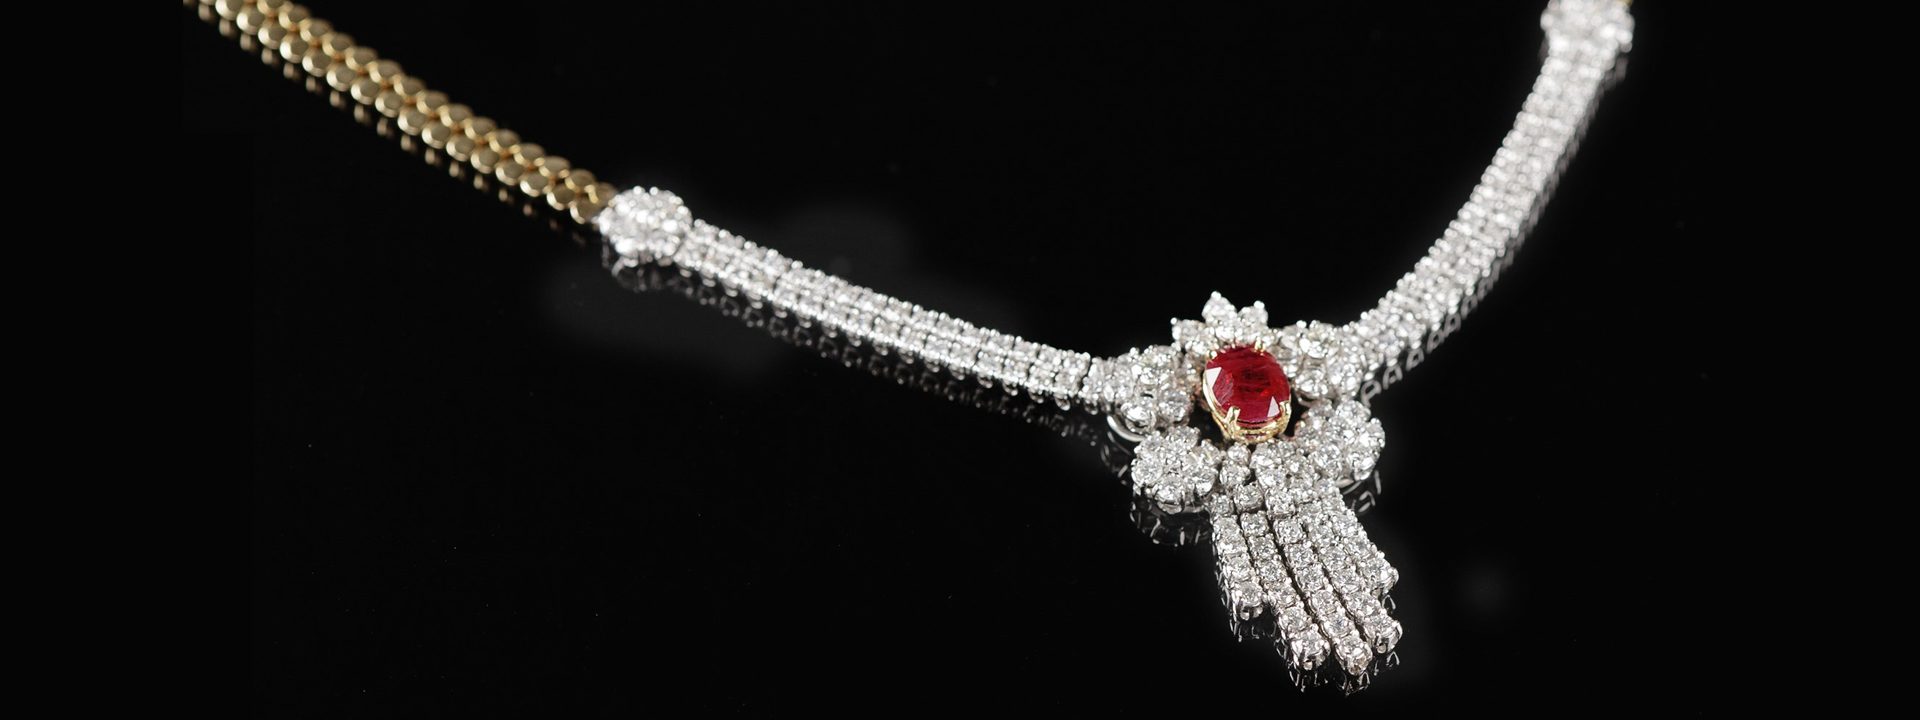 Diamond pendant with ruby in the center.